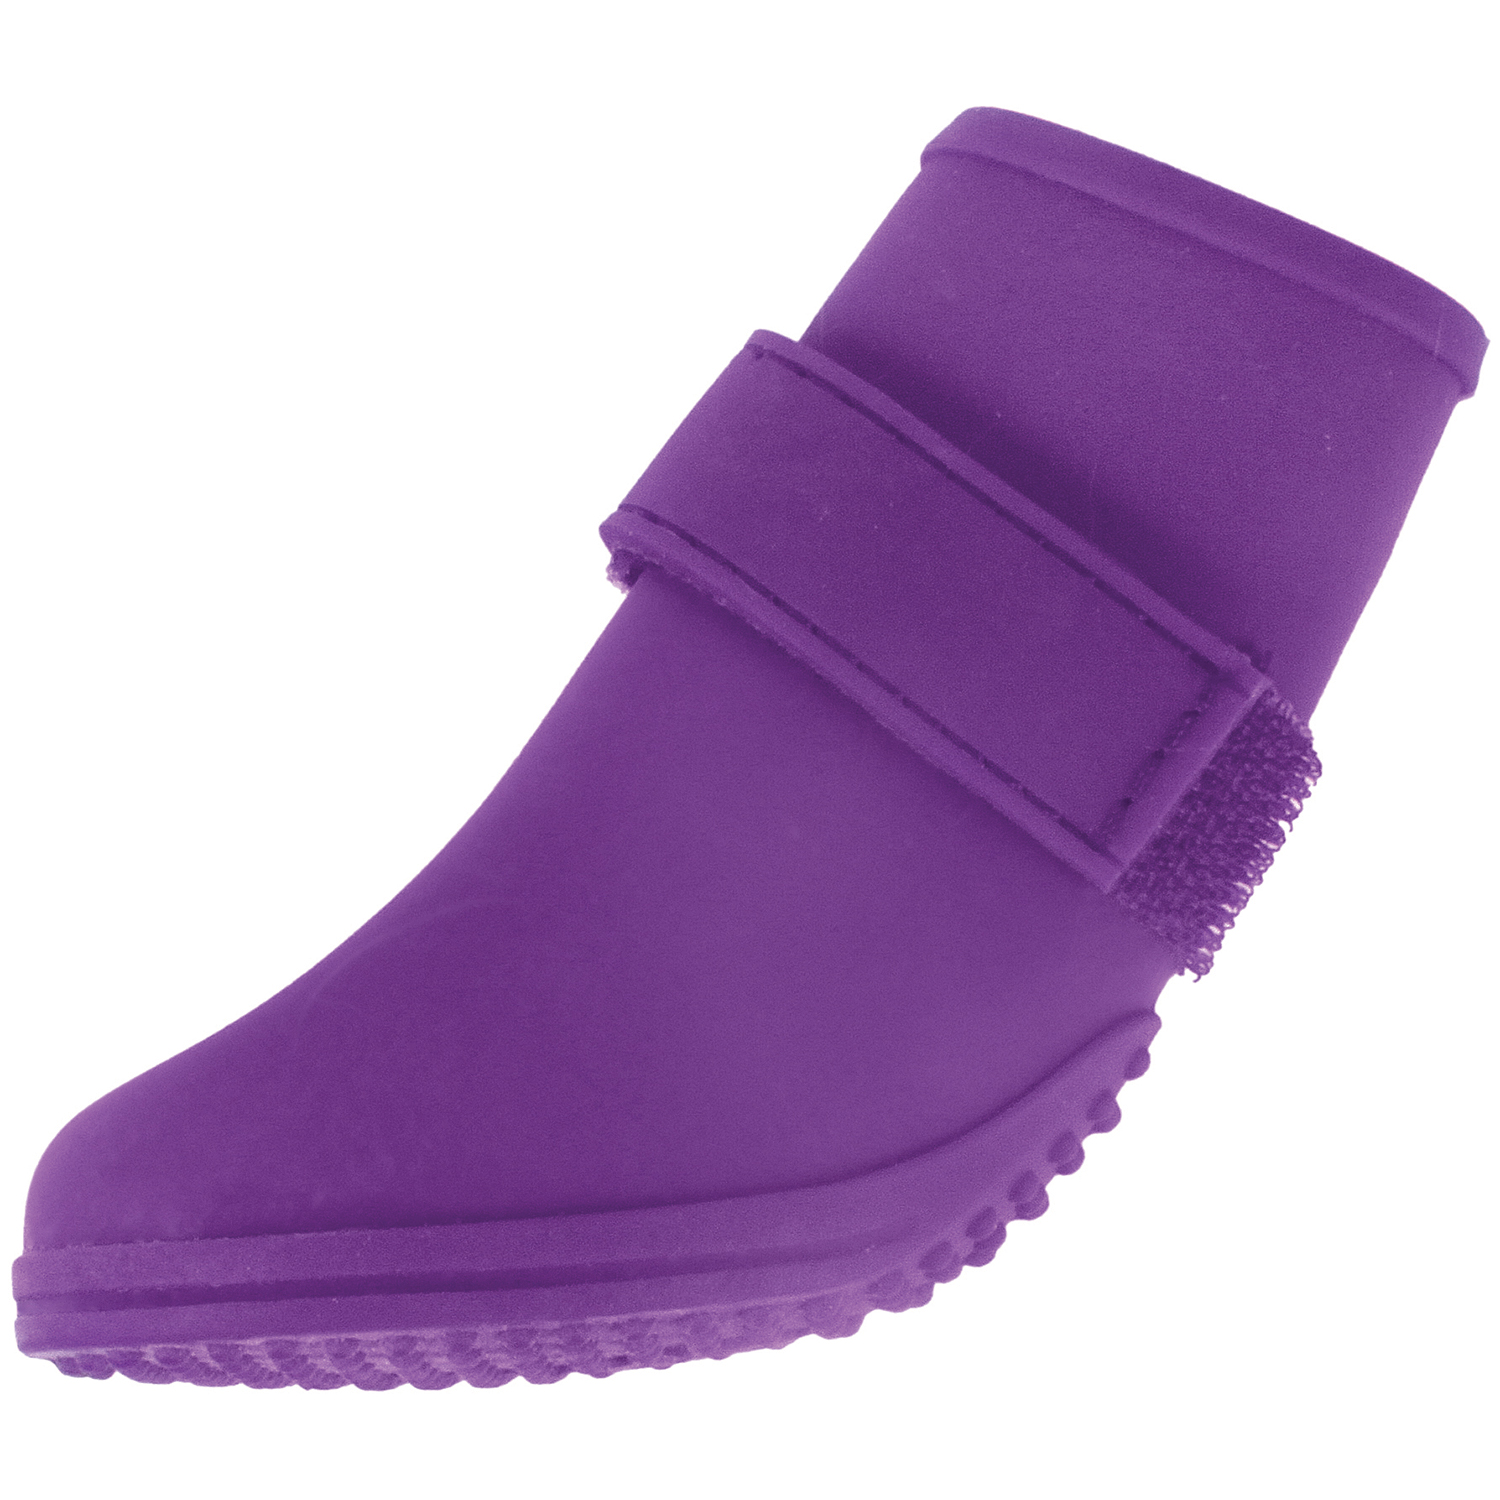 Jelly Wellies Boots Large 3"-Purple, Pk 1, Jelly Wellies - image 1 of 2